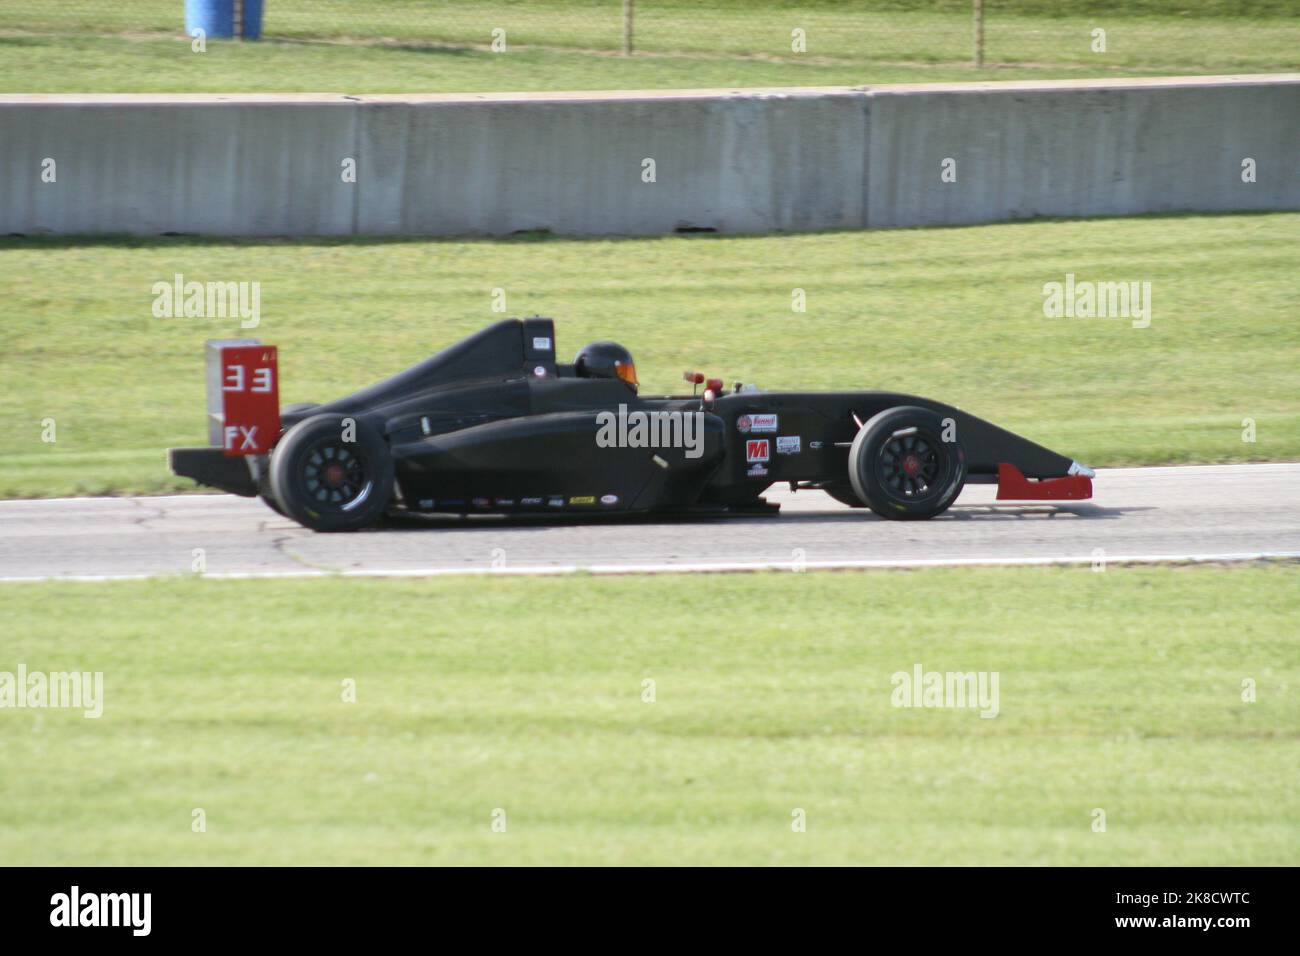 Coming out of 'Thunder Valley' of Road America Sports Car Course during the WeatherTech Chicago Region SCCA June Sprints 2022. Stock Photo